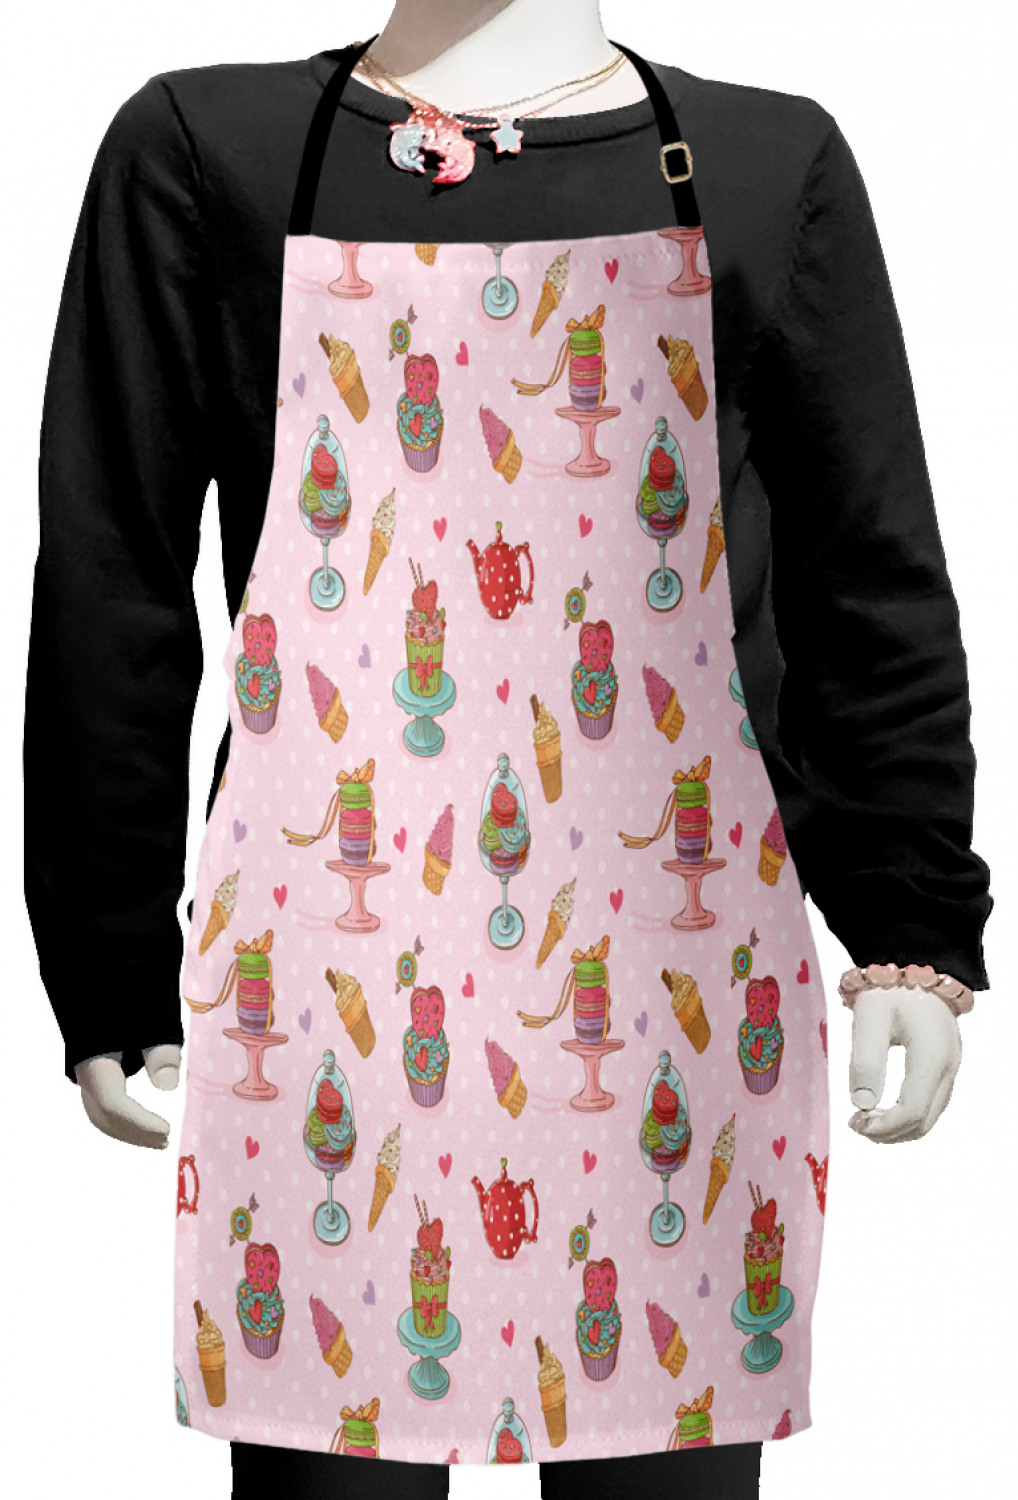 TODDLER’S CRAFT/ COOKERY APRON ICE CREAMS MACHINE WASHABLE LINED COTTON